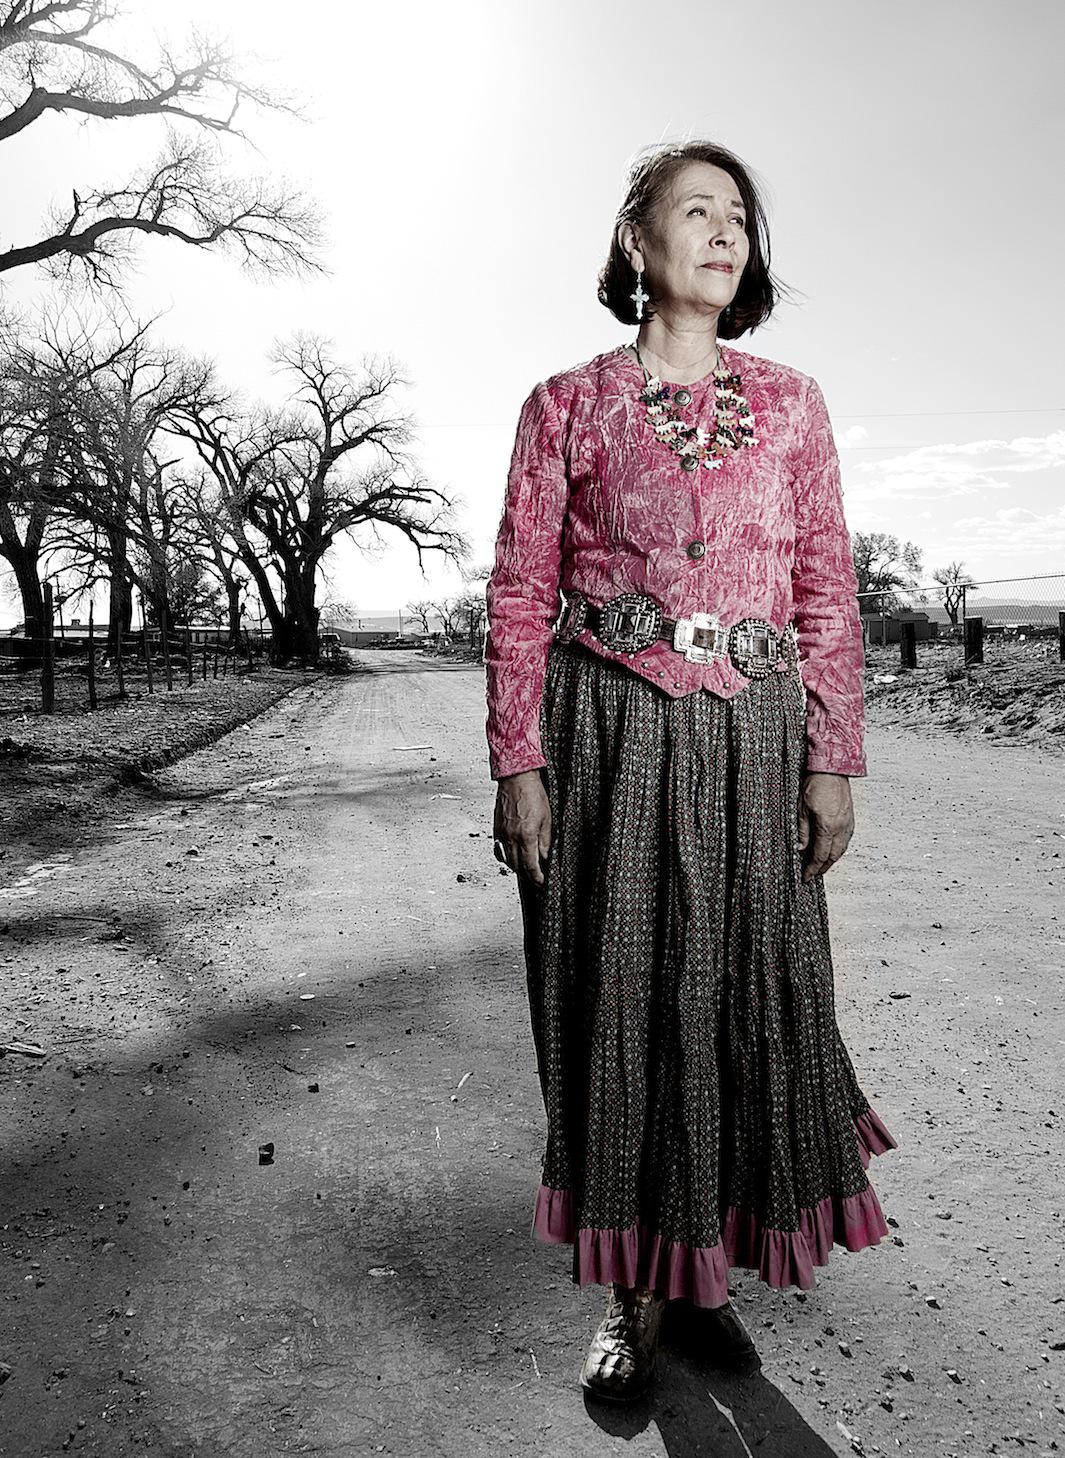 Matika Wilbur Photographs Every Native American Tribe In The Us In Her Series “project 562” 